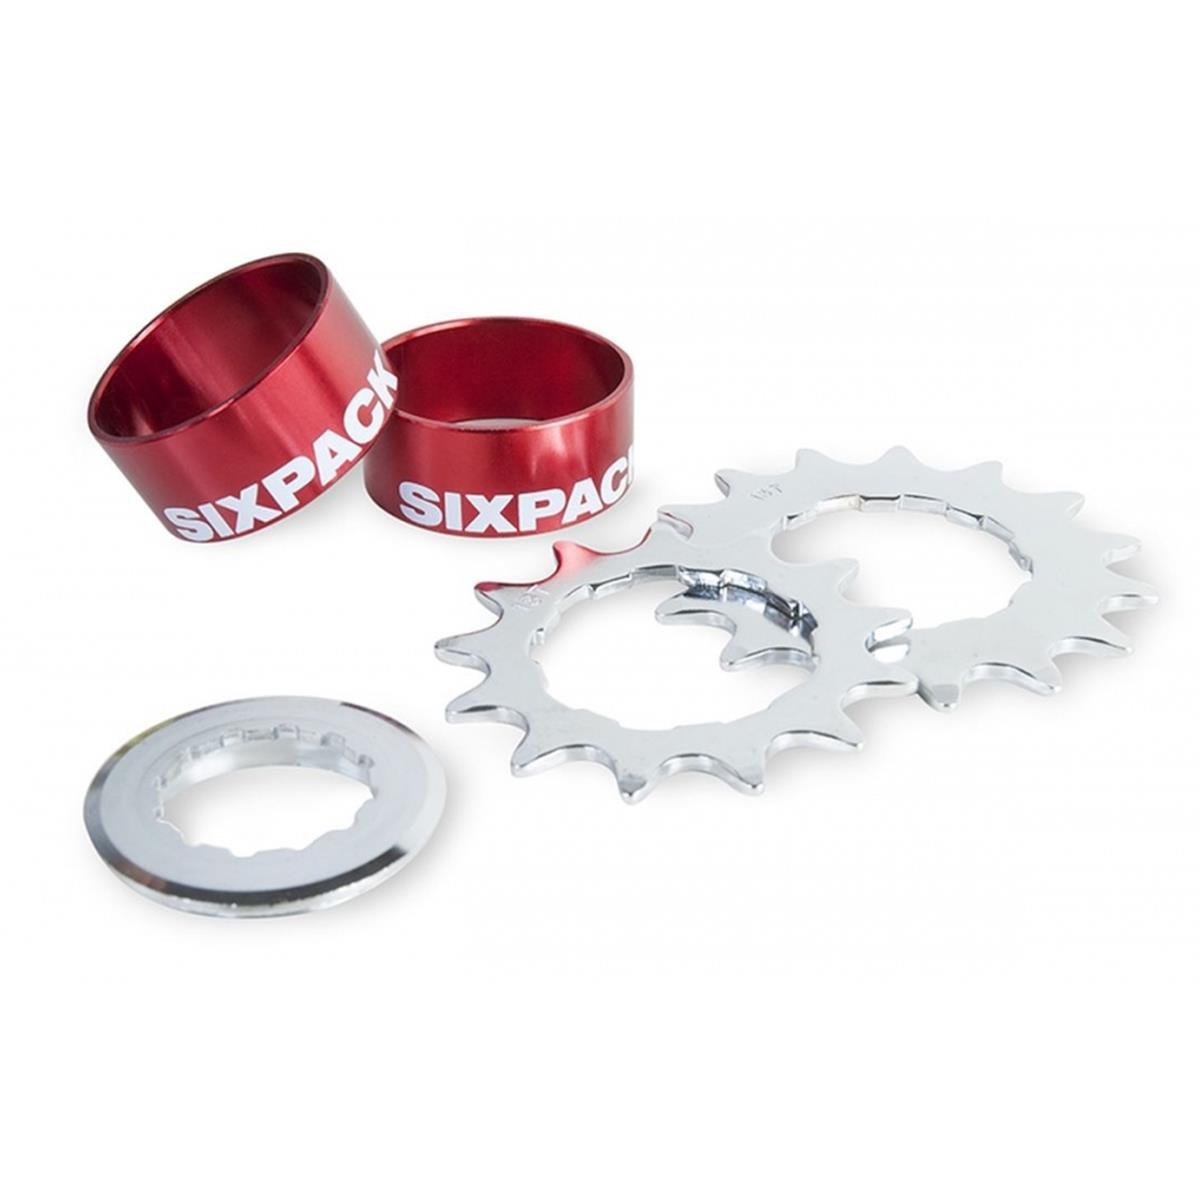 Sixpack Kit de conversion Single Speed  Rouge, incl. 2 Chainrings (13 & 15T), fits 8/9710-V Shimano/Sram FreeRoues